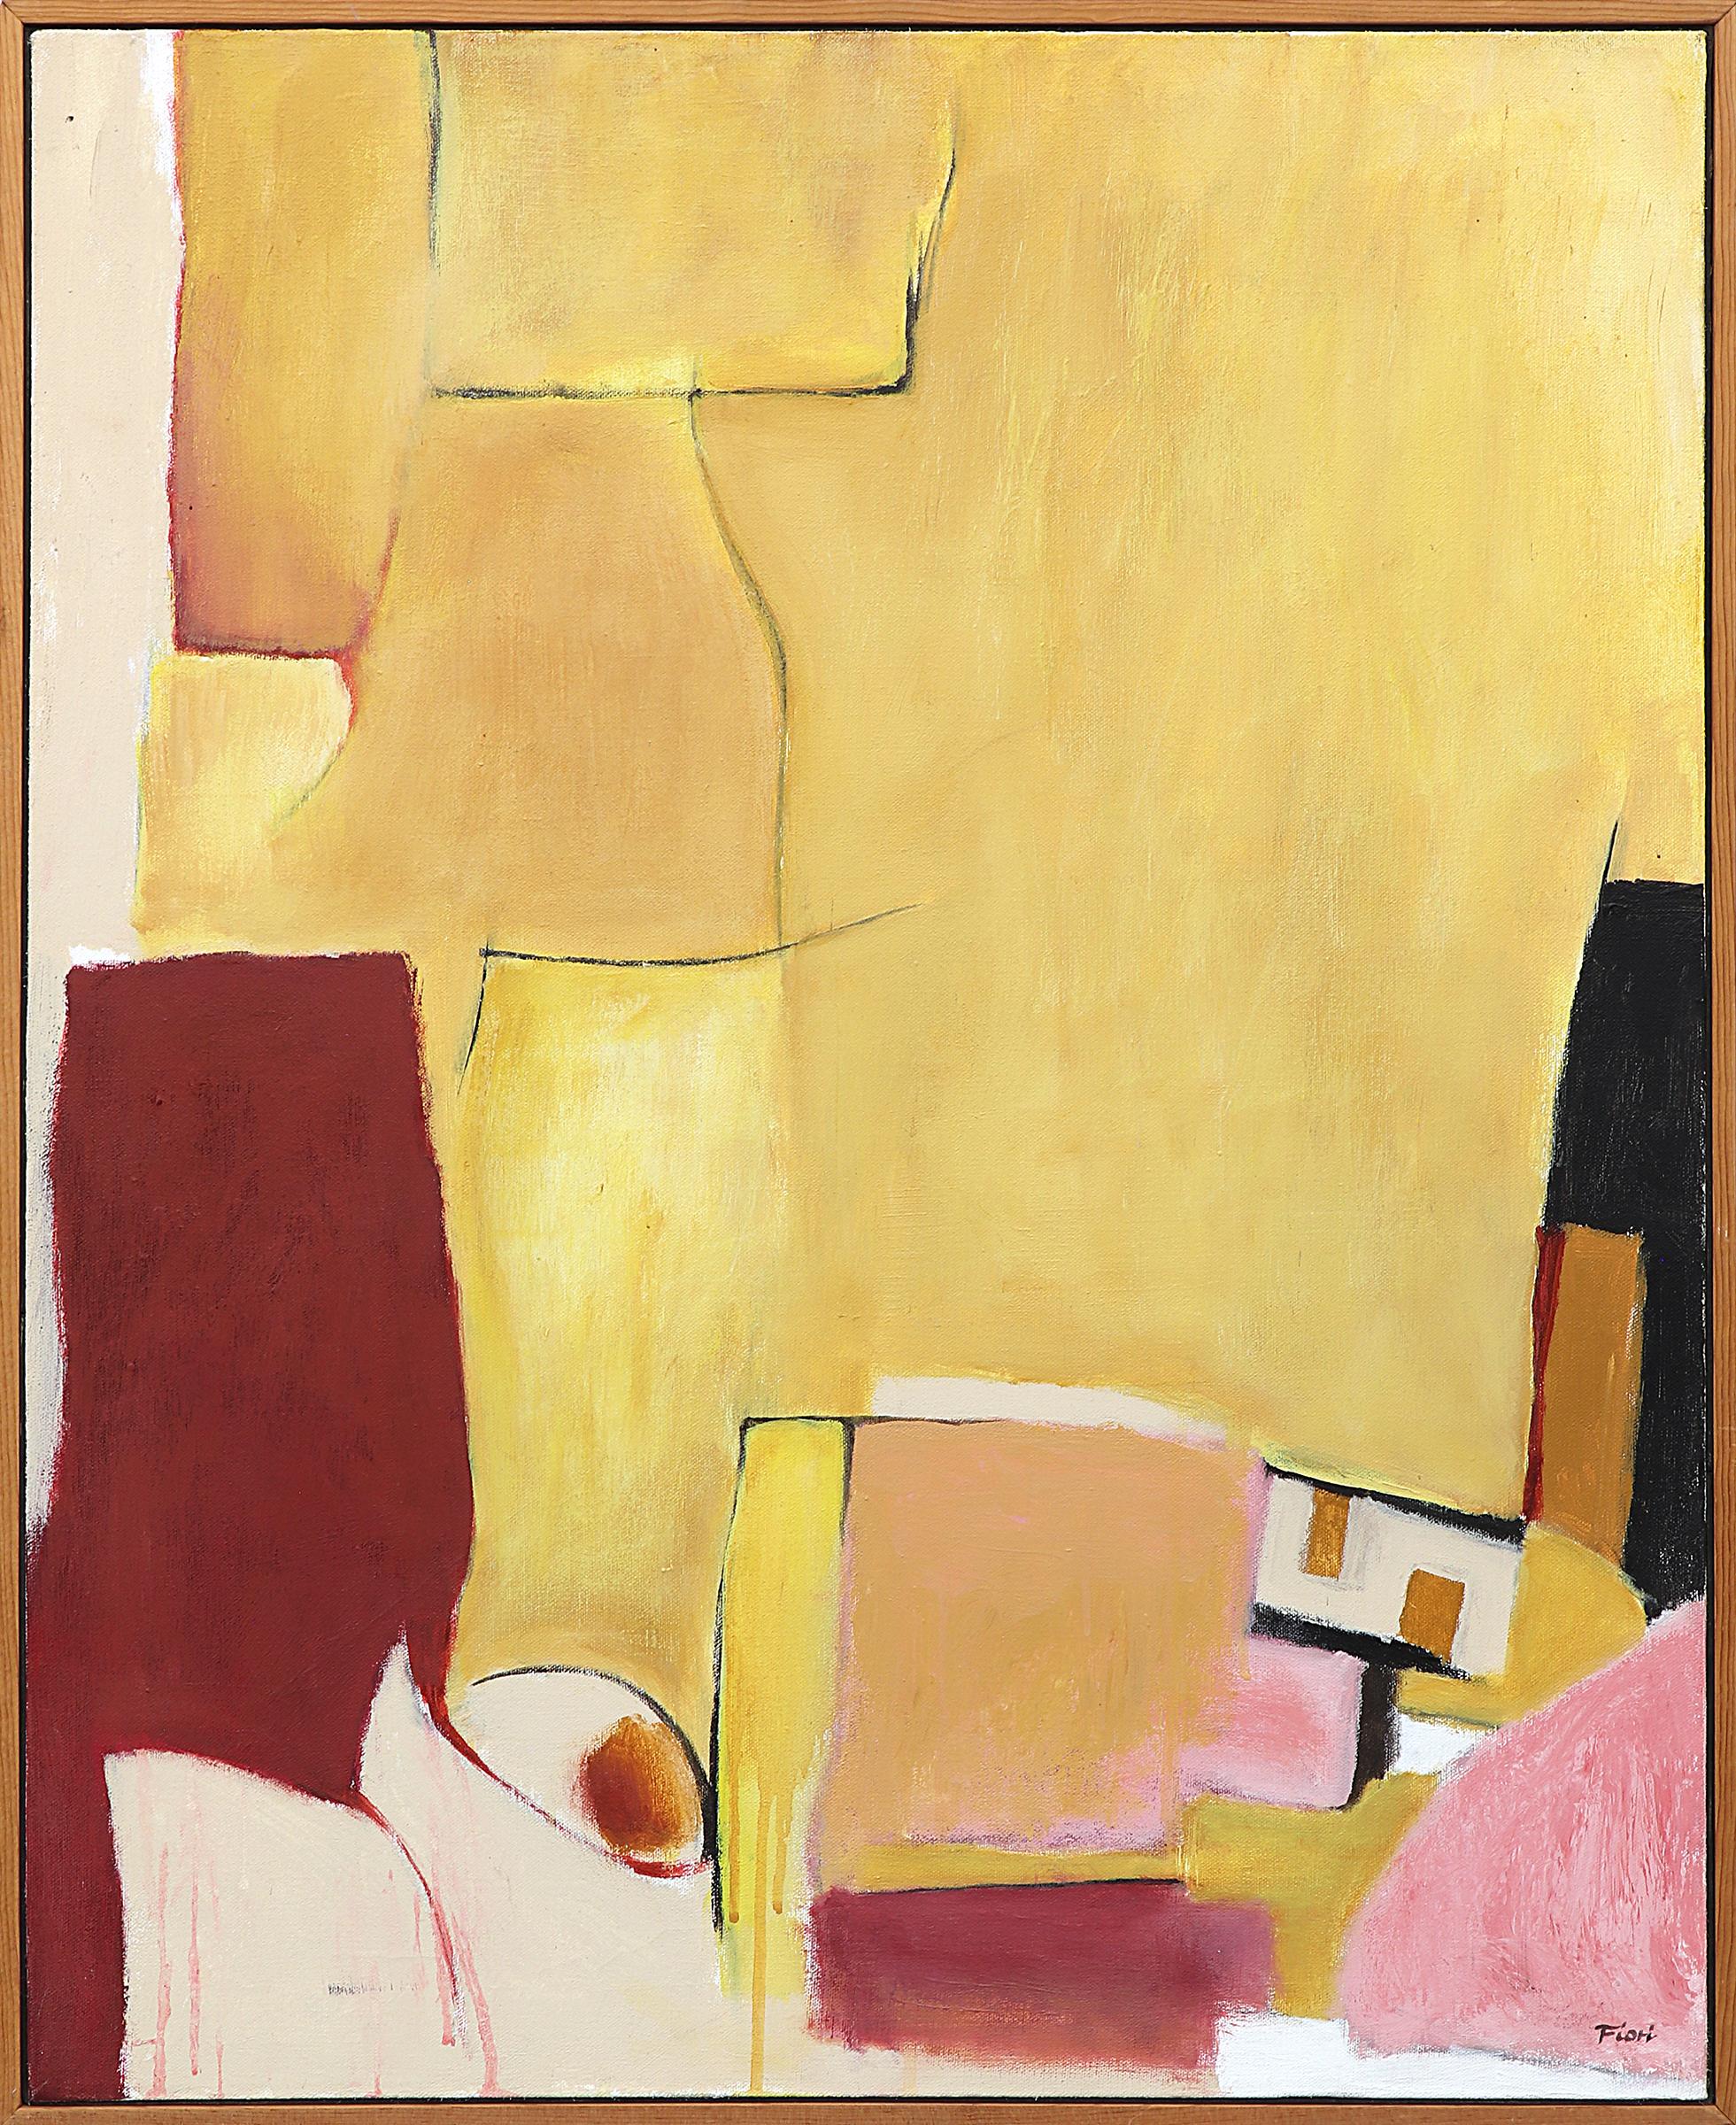 Wilma Fiori Landscape Painting - Mesa Verde, 1980s Abstract Landscape Oil on Canvas Painting, Yellow, Pink, Gold